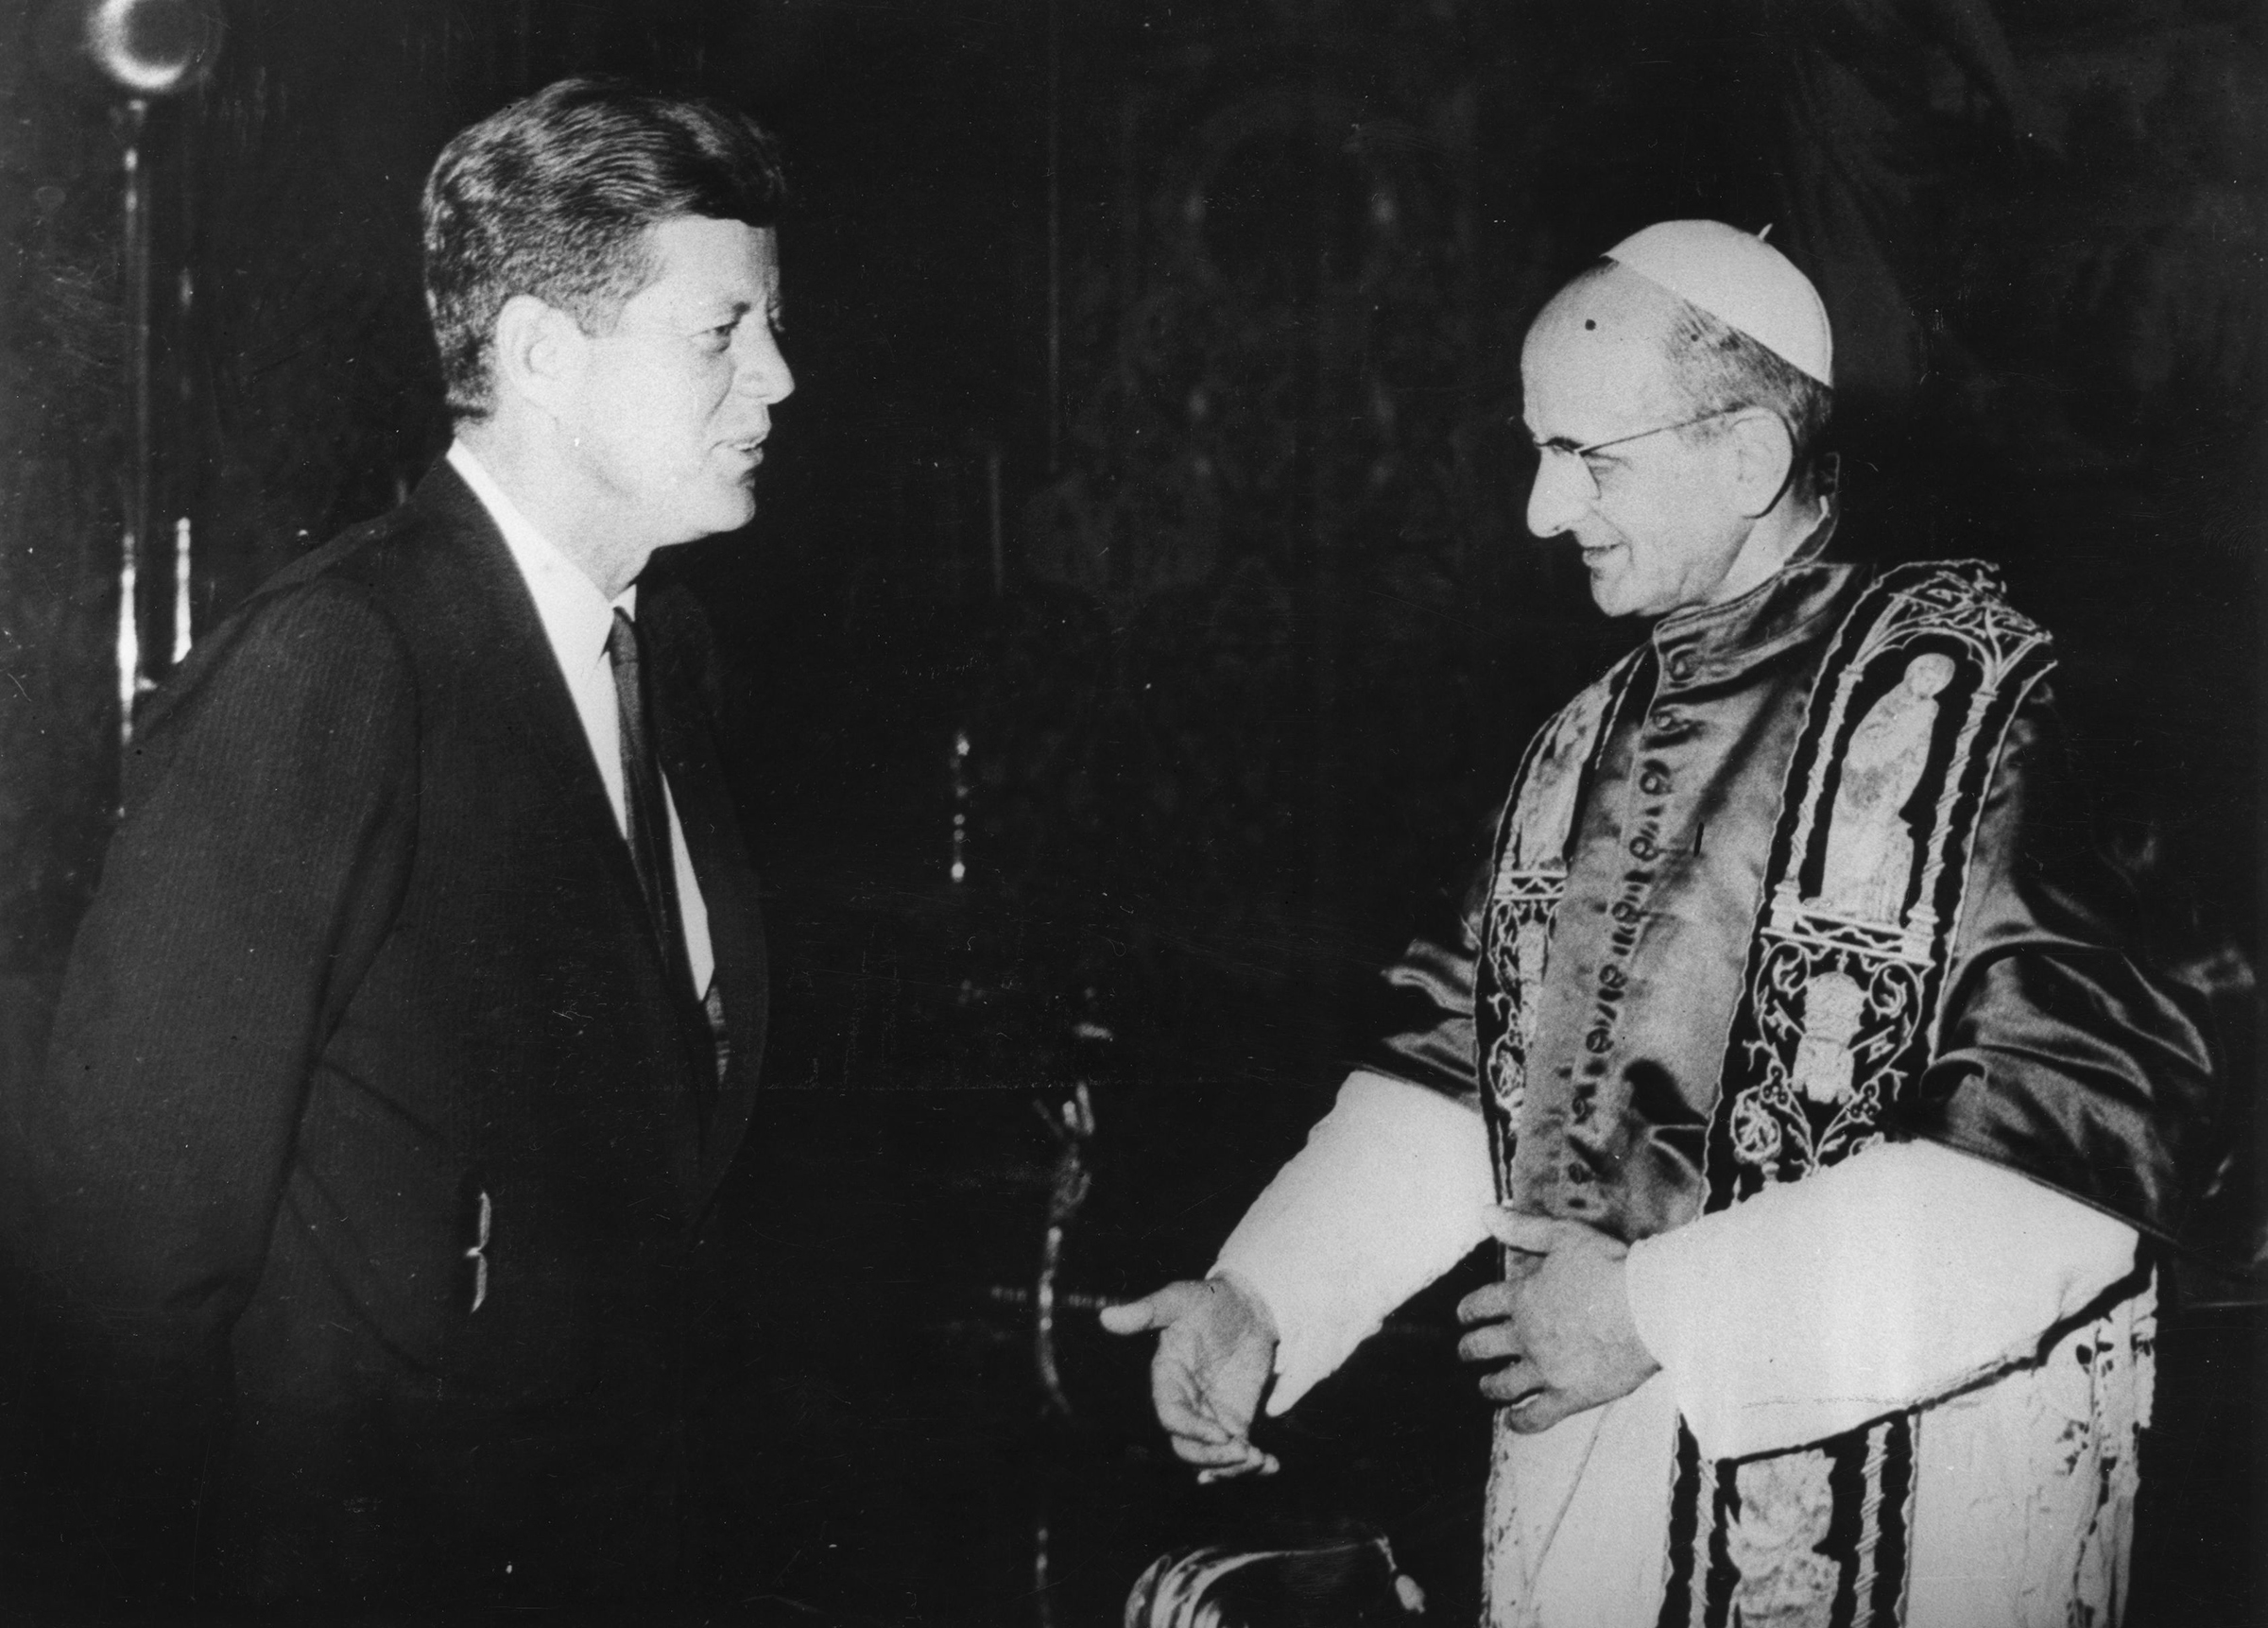 John F. Kennedy, the nation’s first Roman Catholic President, greets the newly elected Pope Paul VI at the Vatican in July 1963 (Keystone/Getty Images)